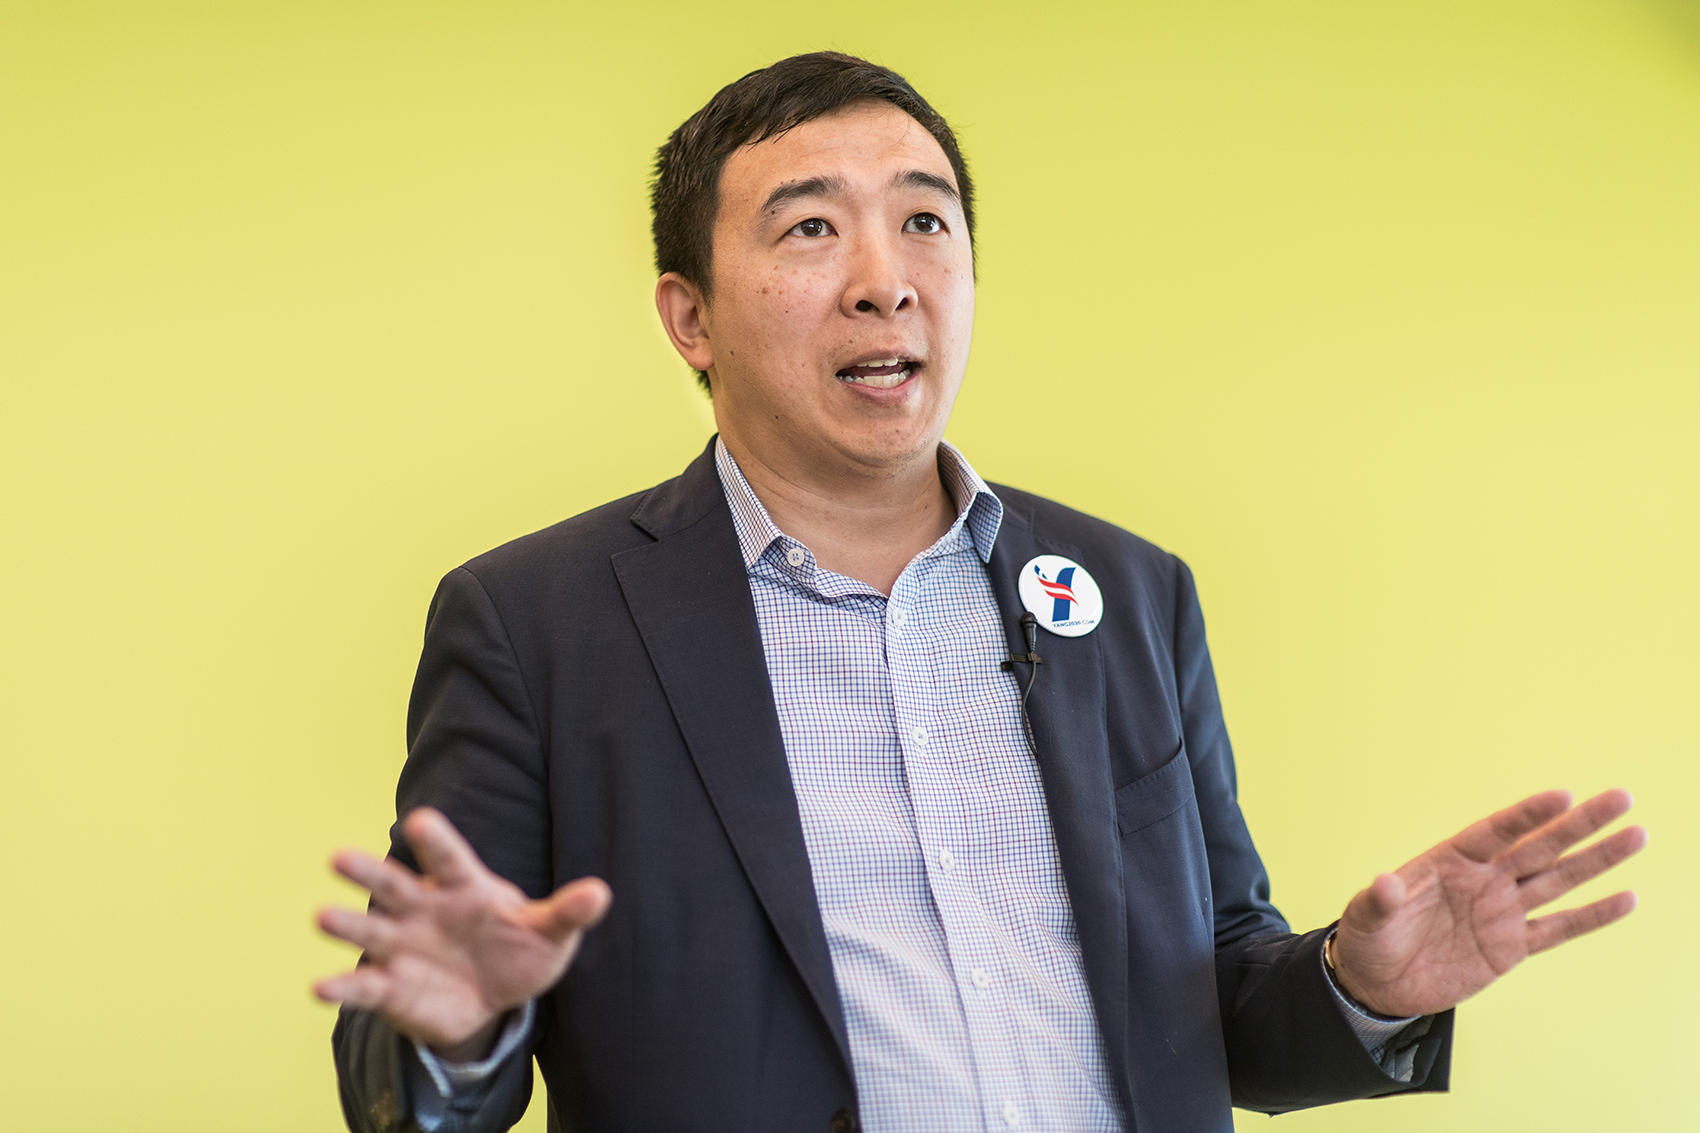 America Is 'Decades Behind The Curve On Technology,' 2020 Candidate Andrew Yang Says ...